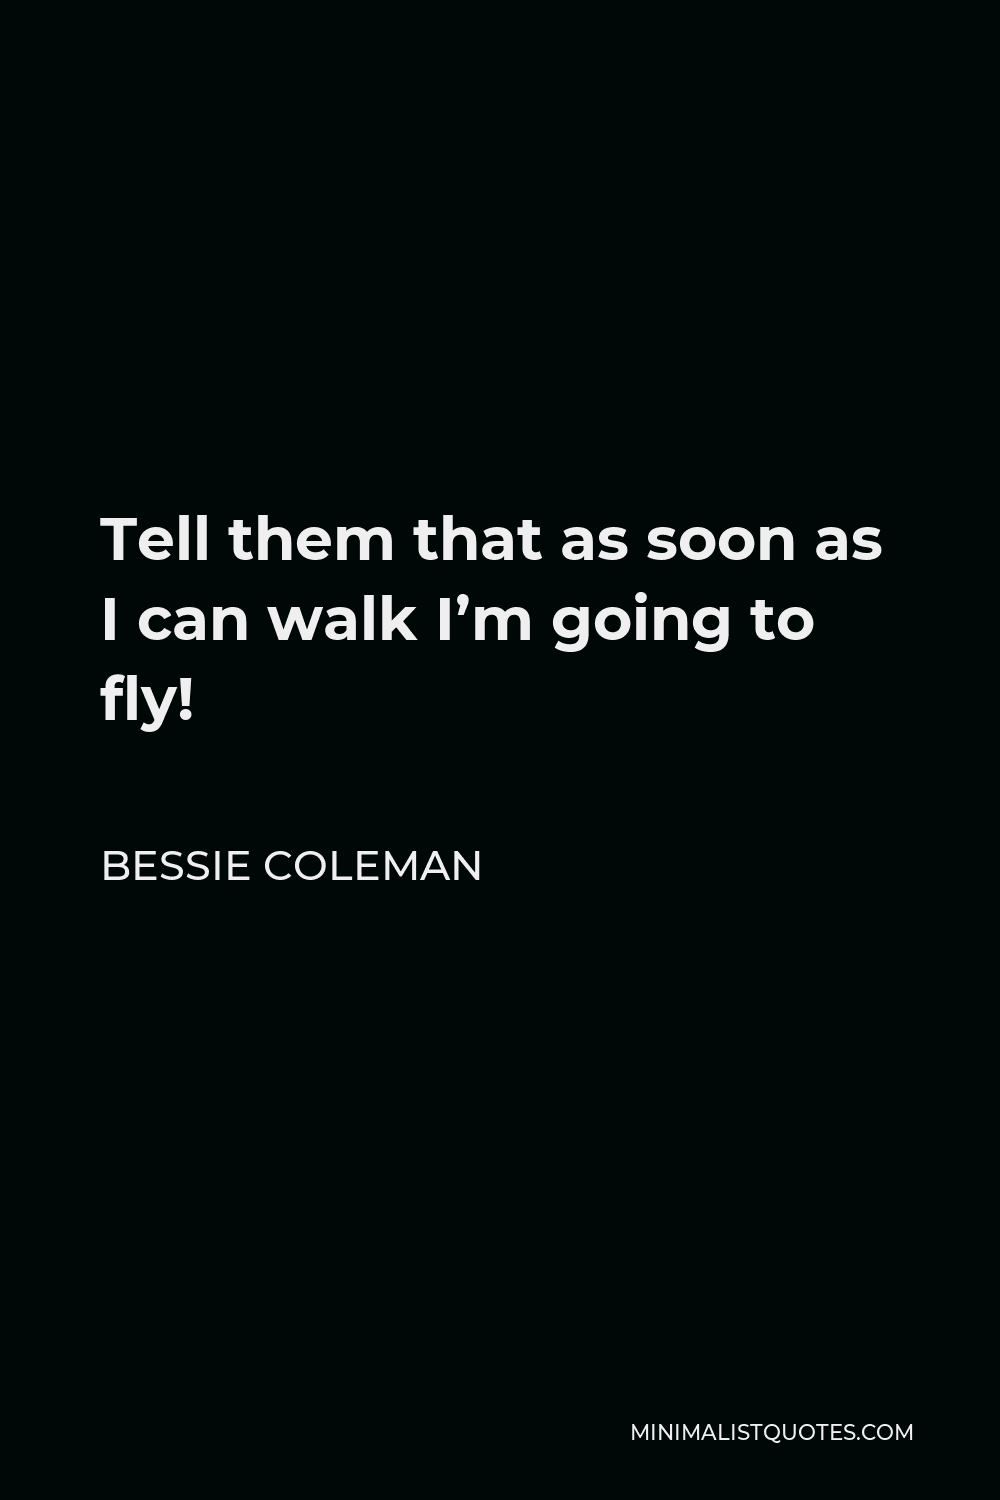 Bessie Coleman Quote - Tell them that as soon as I can walk I’m going to fly!